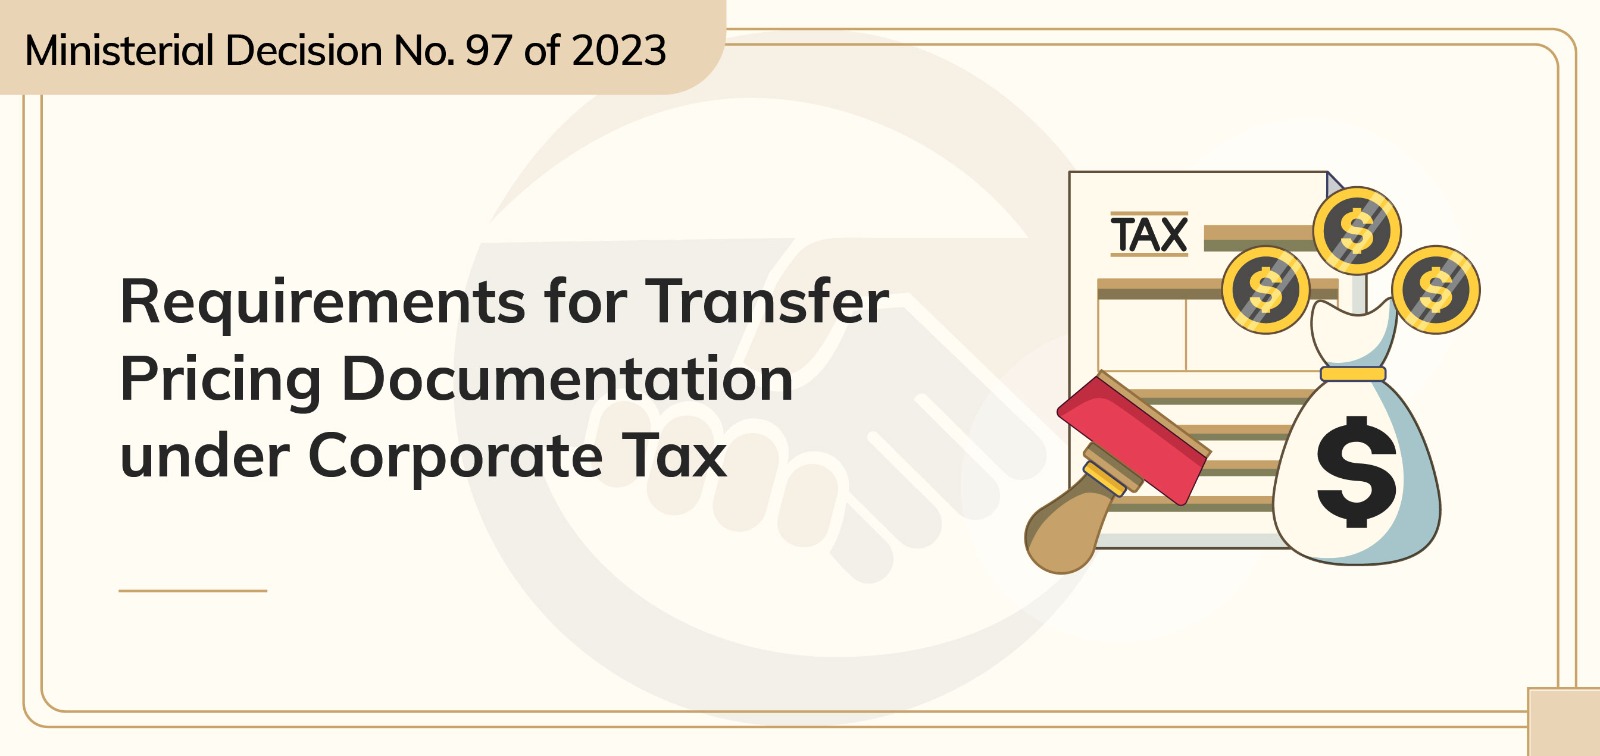 Requirements for Transfer Pricing Documentation under Corporate Tax